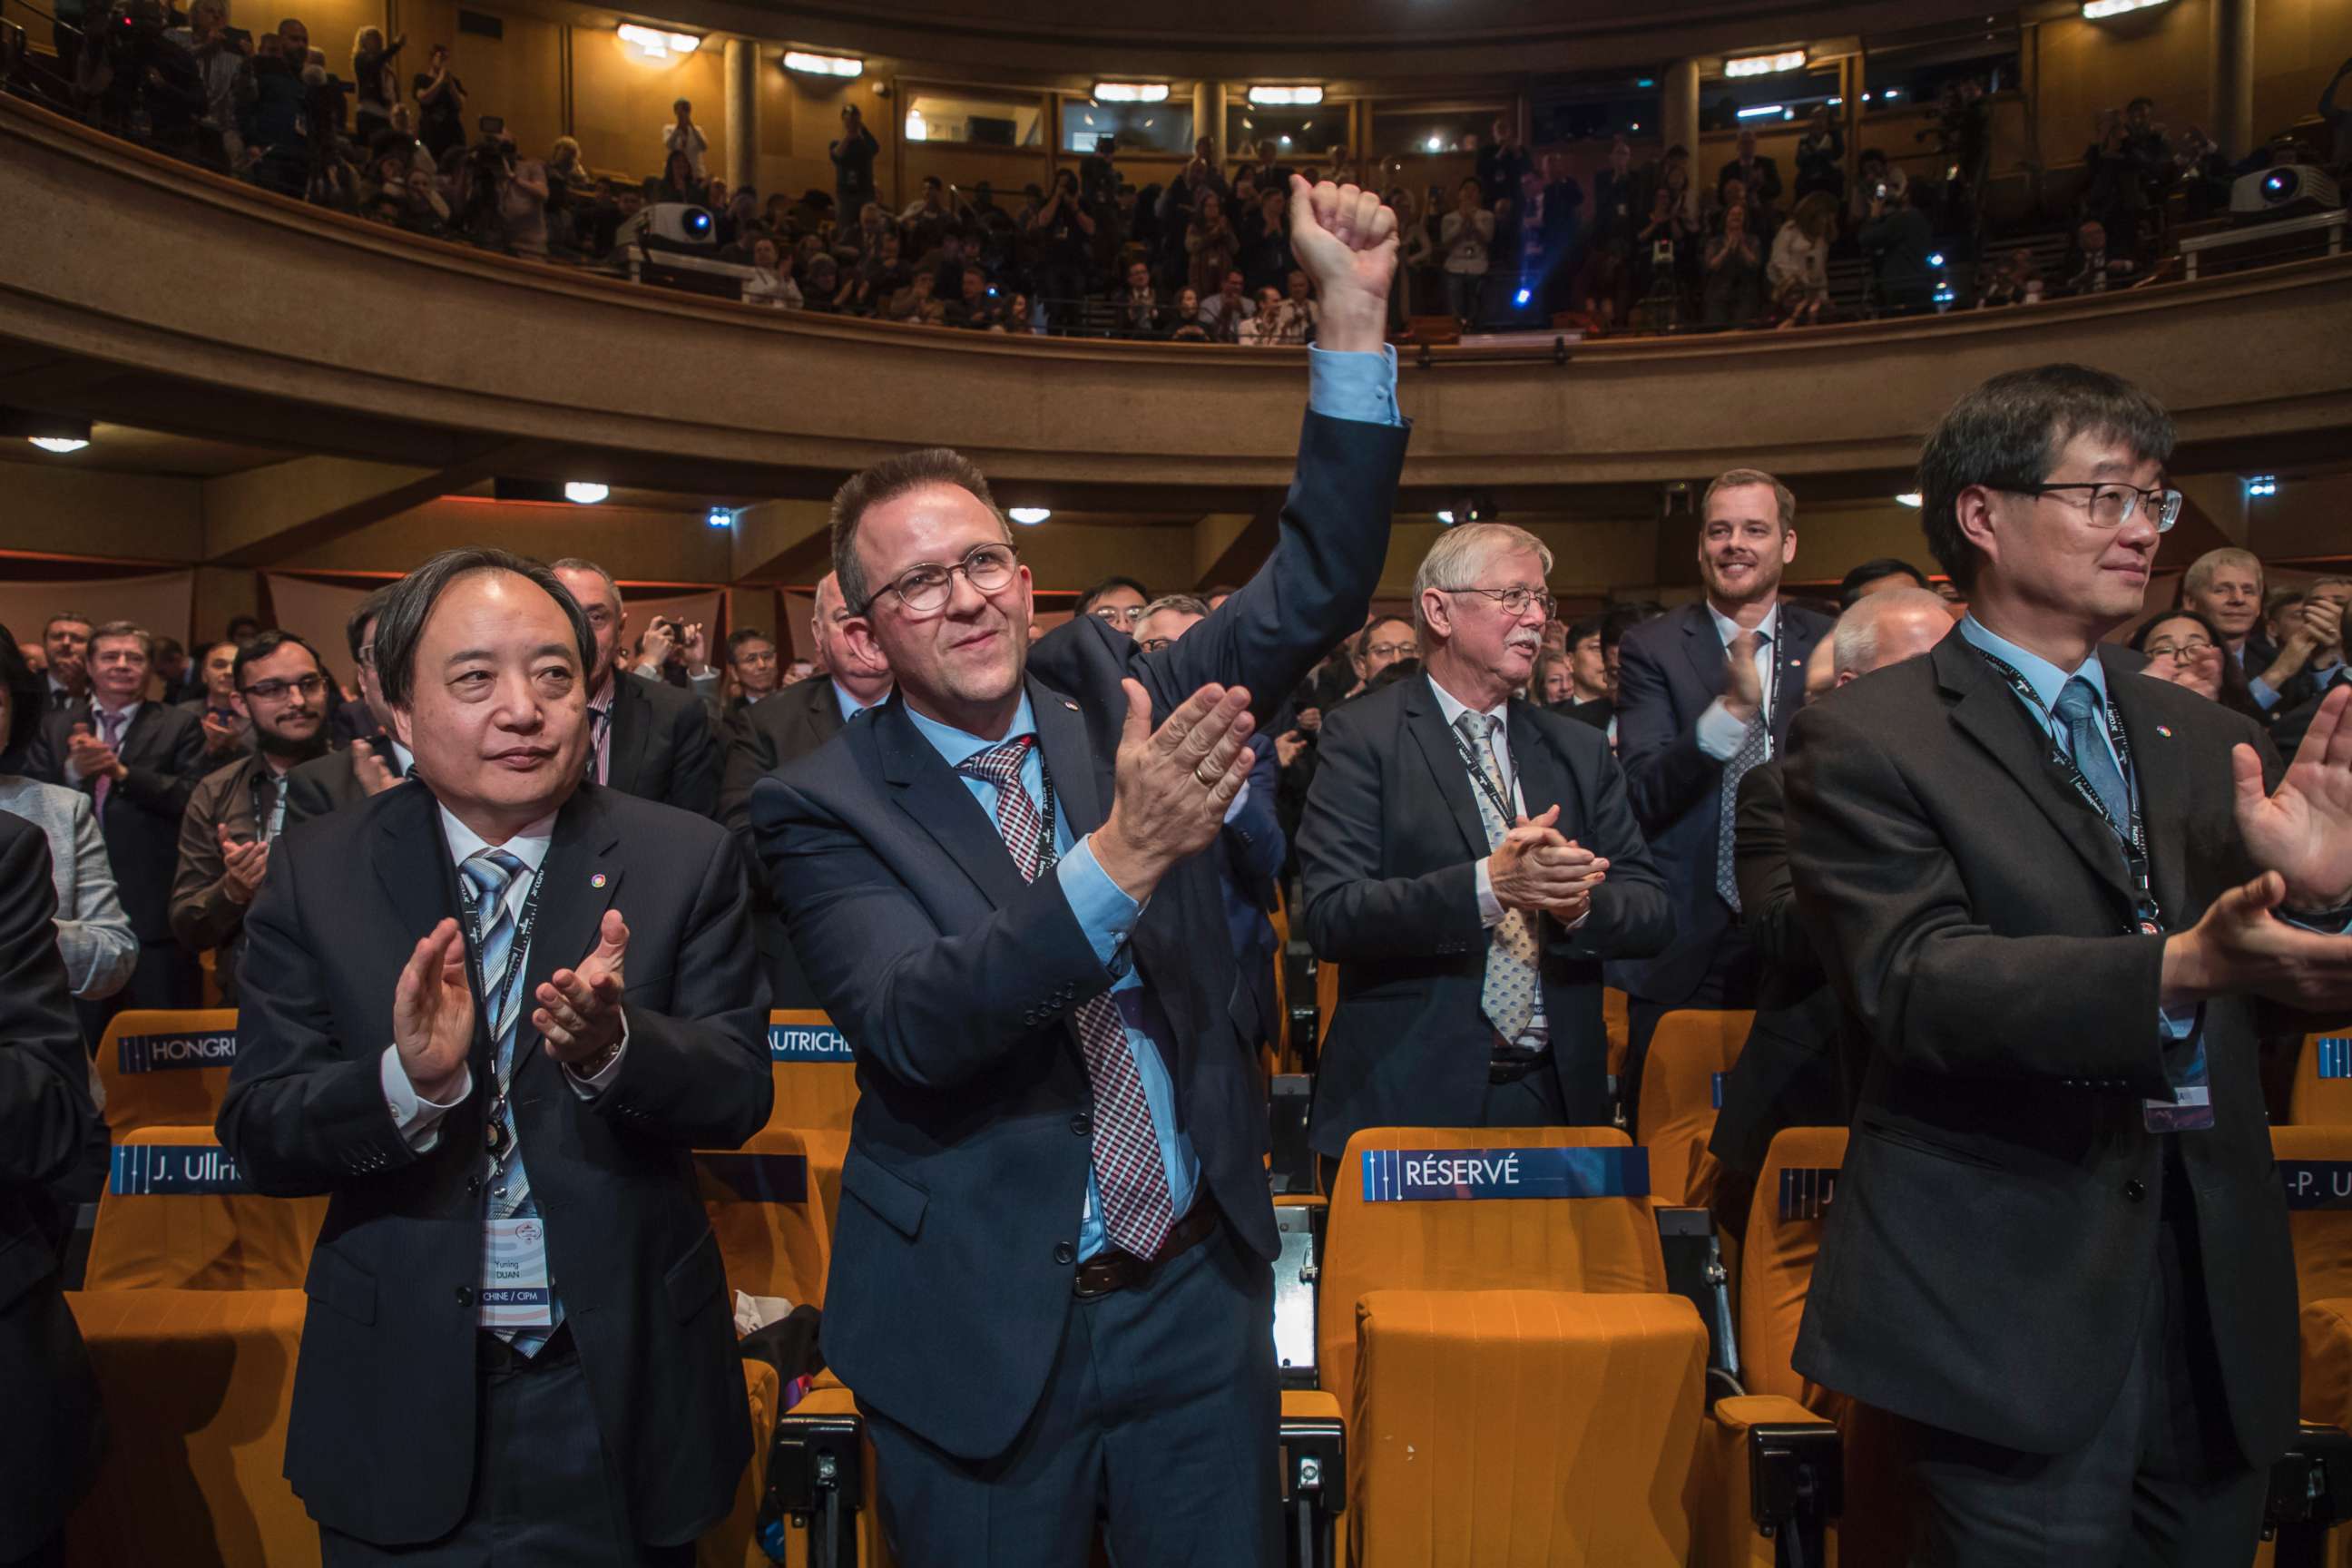 PHOTO: Dutch CIPM member Gert Rietveld and International representatives applause after the final vote introducing the reform during the International General Conference of Weights and Measures held in Versailles, near Paris, France, Nov. 16, 2018.